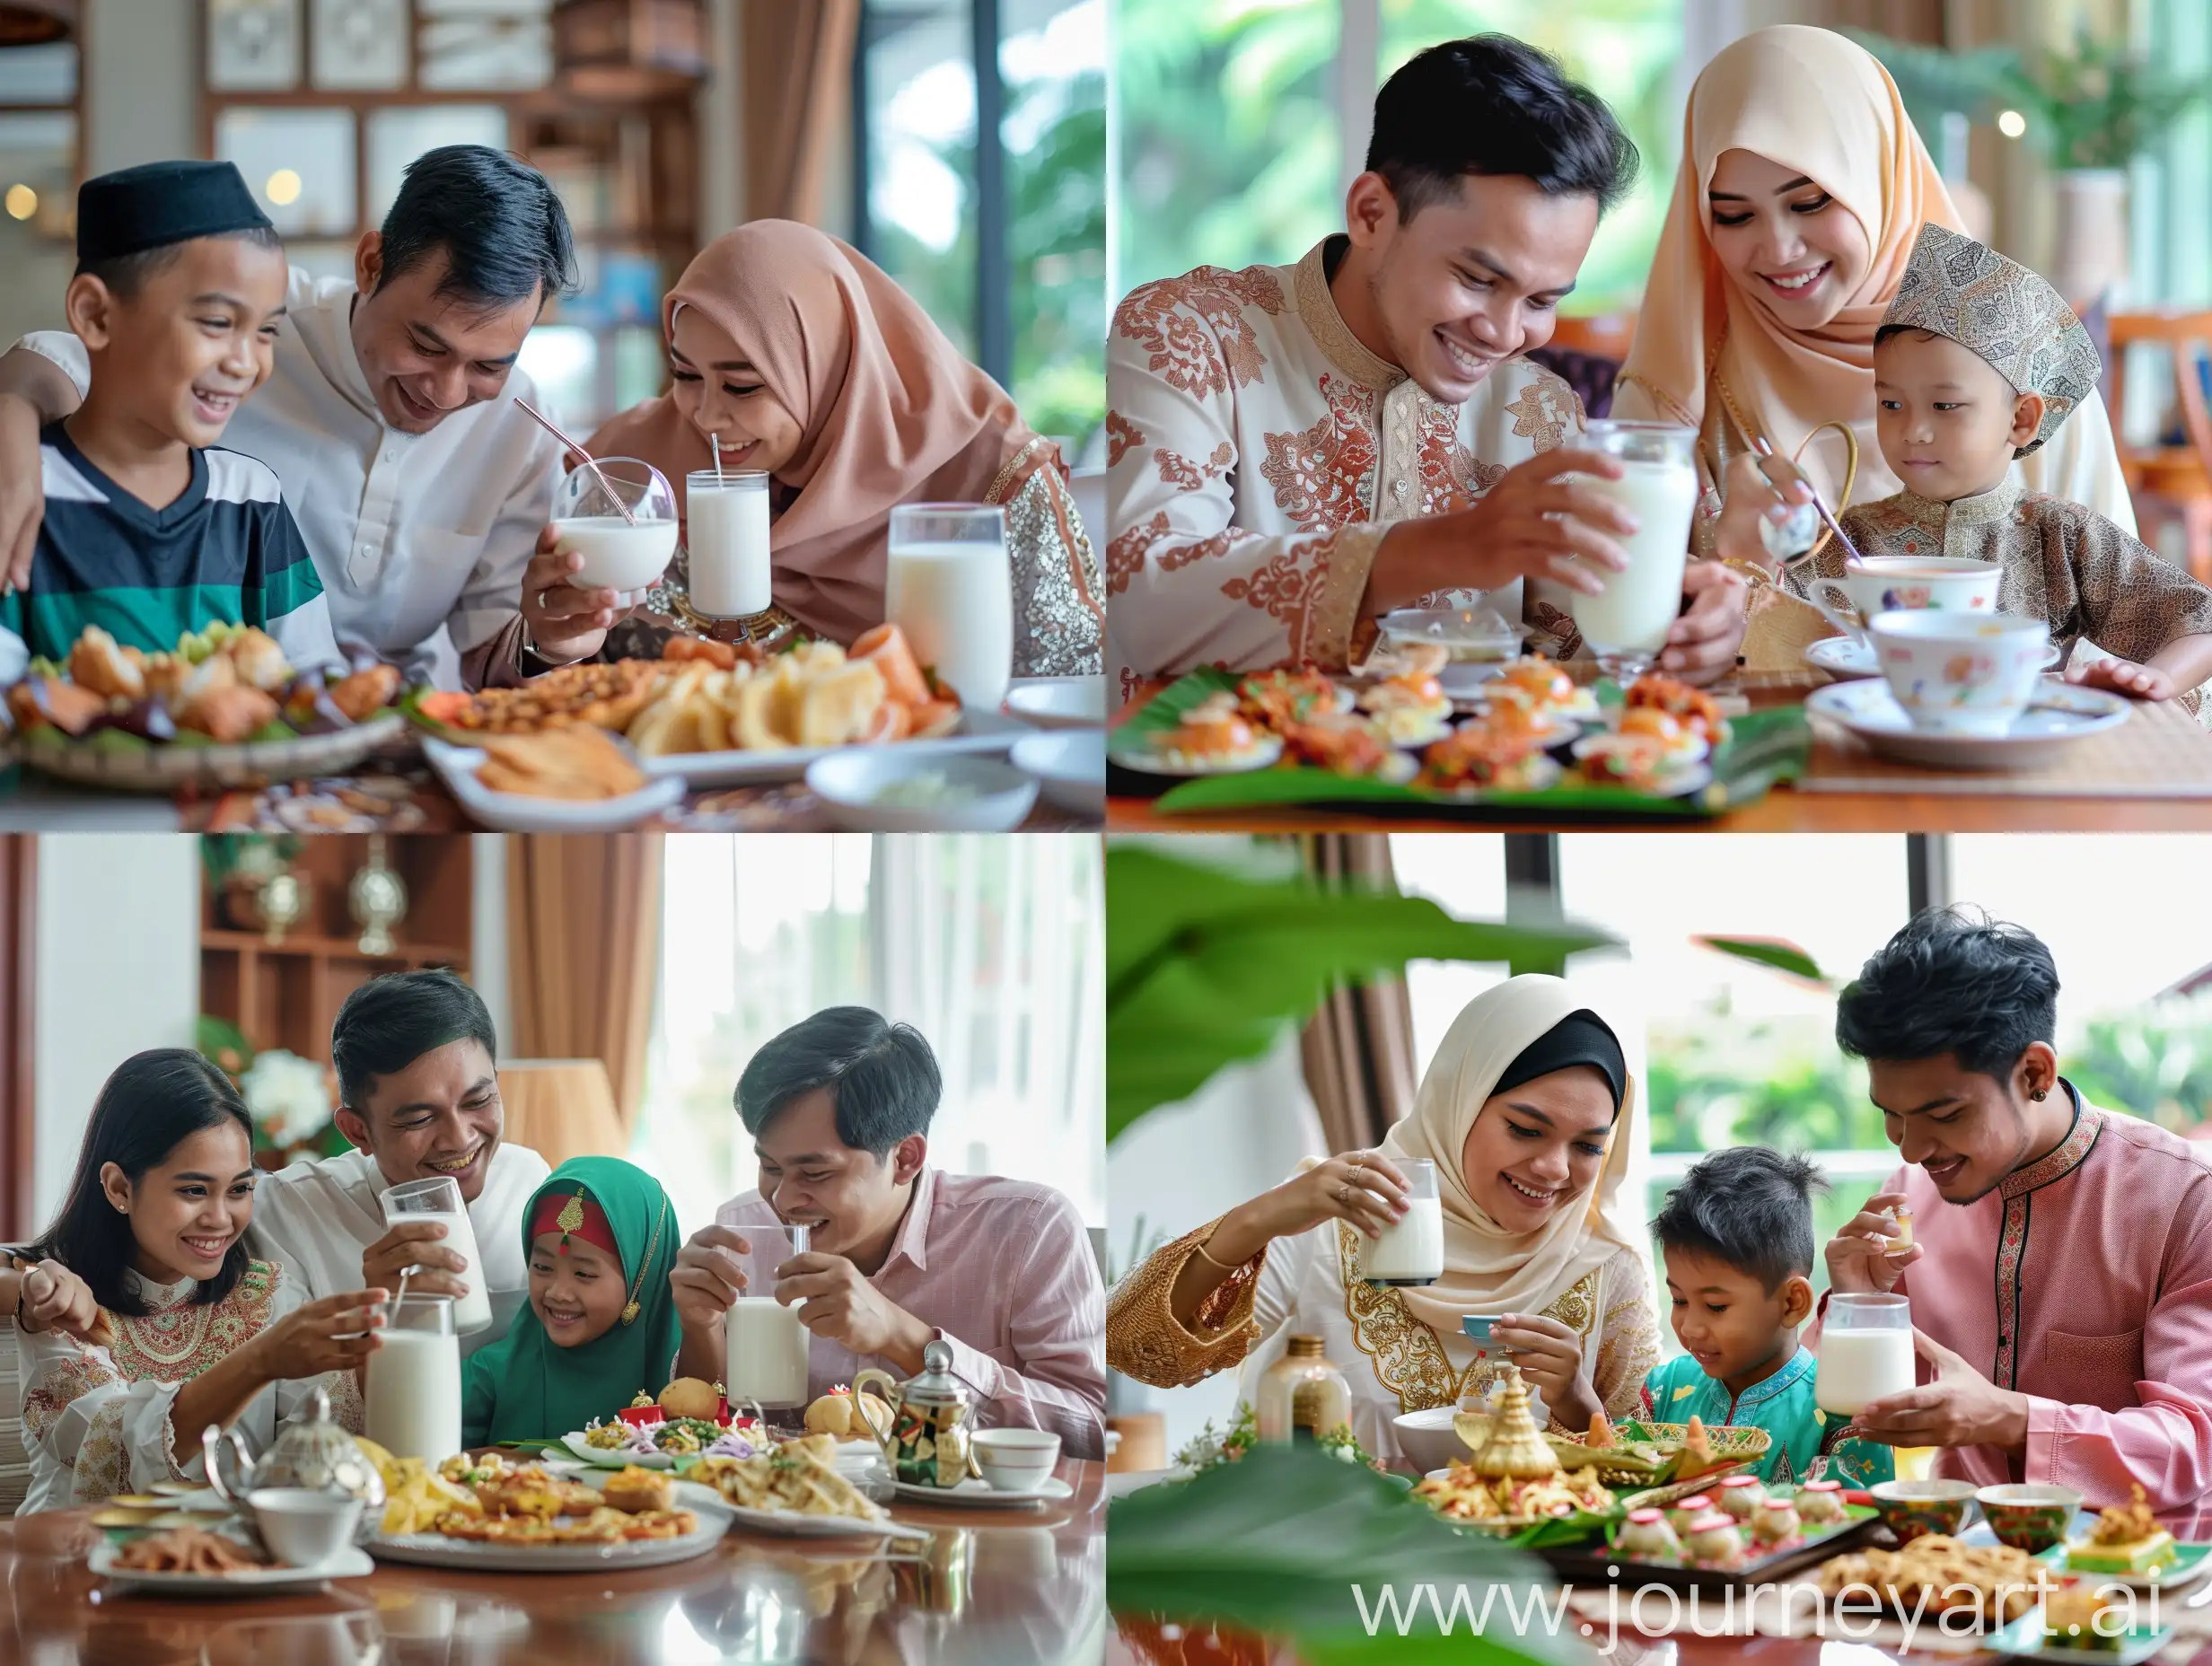 a raw photo of muslim family celebrating hari raya while drinking milk with traditional muslim appetizer on table, Sigma 24mm, wide angle, long shot composition